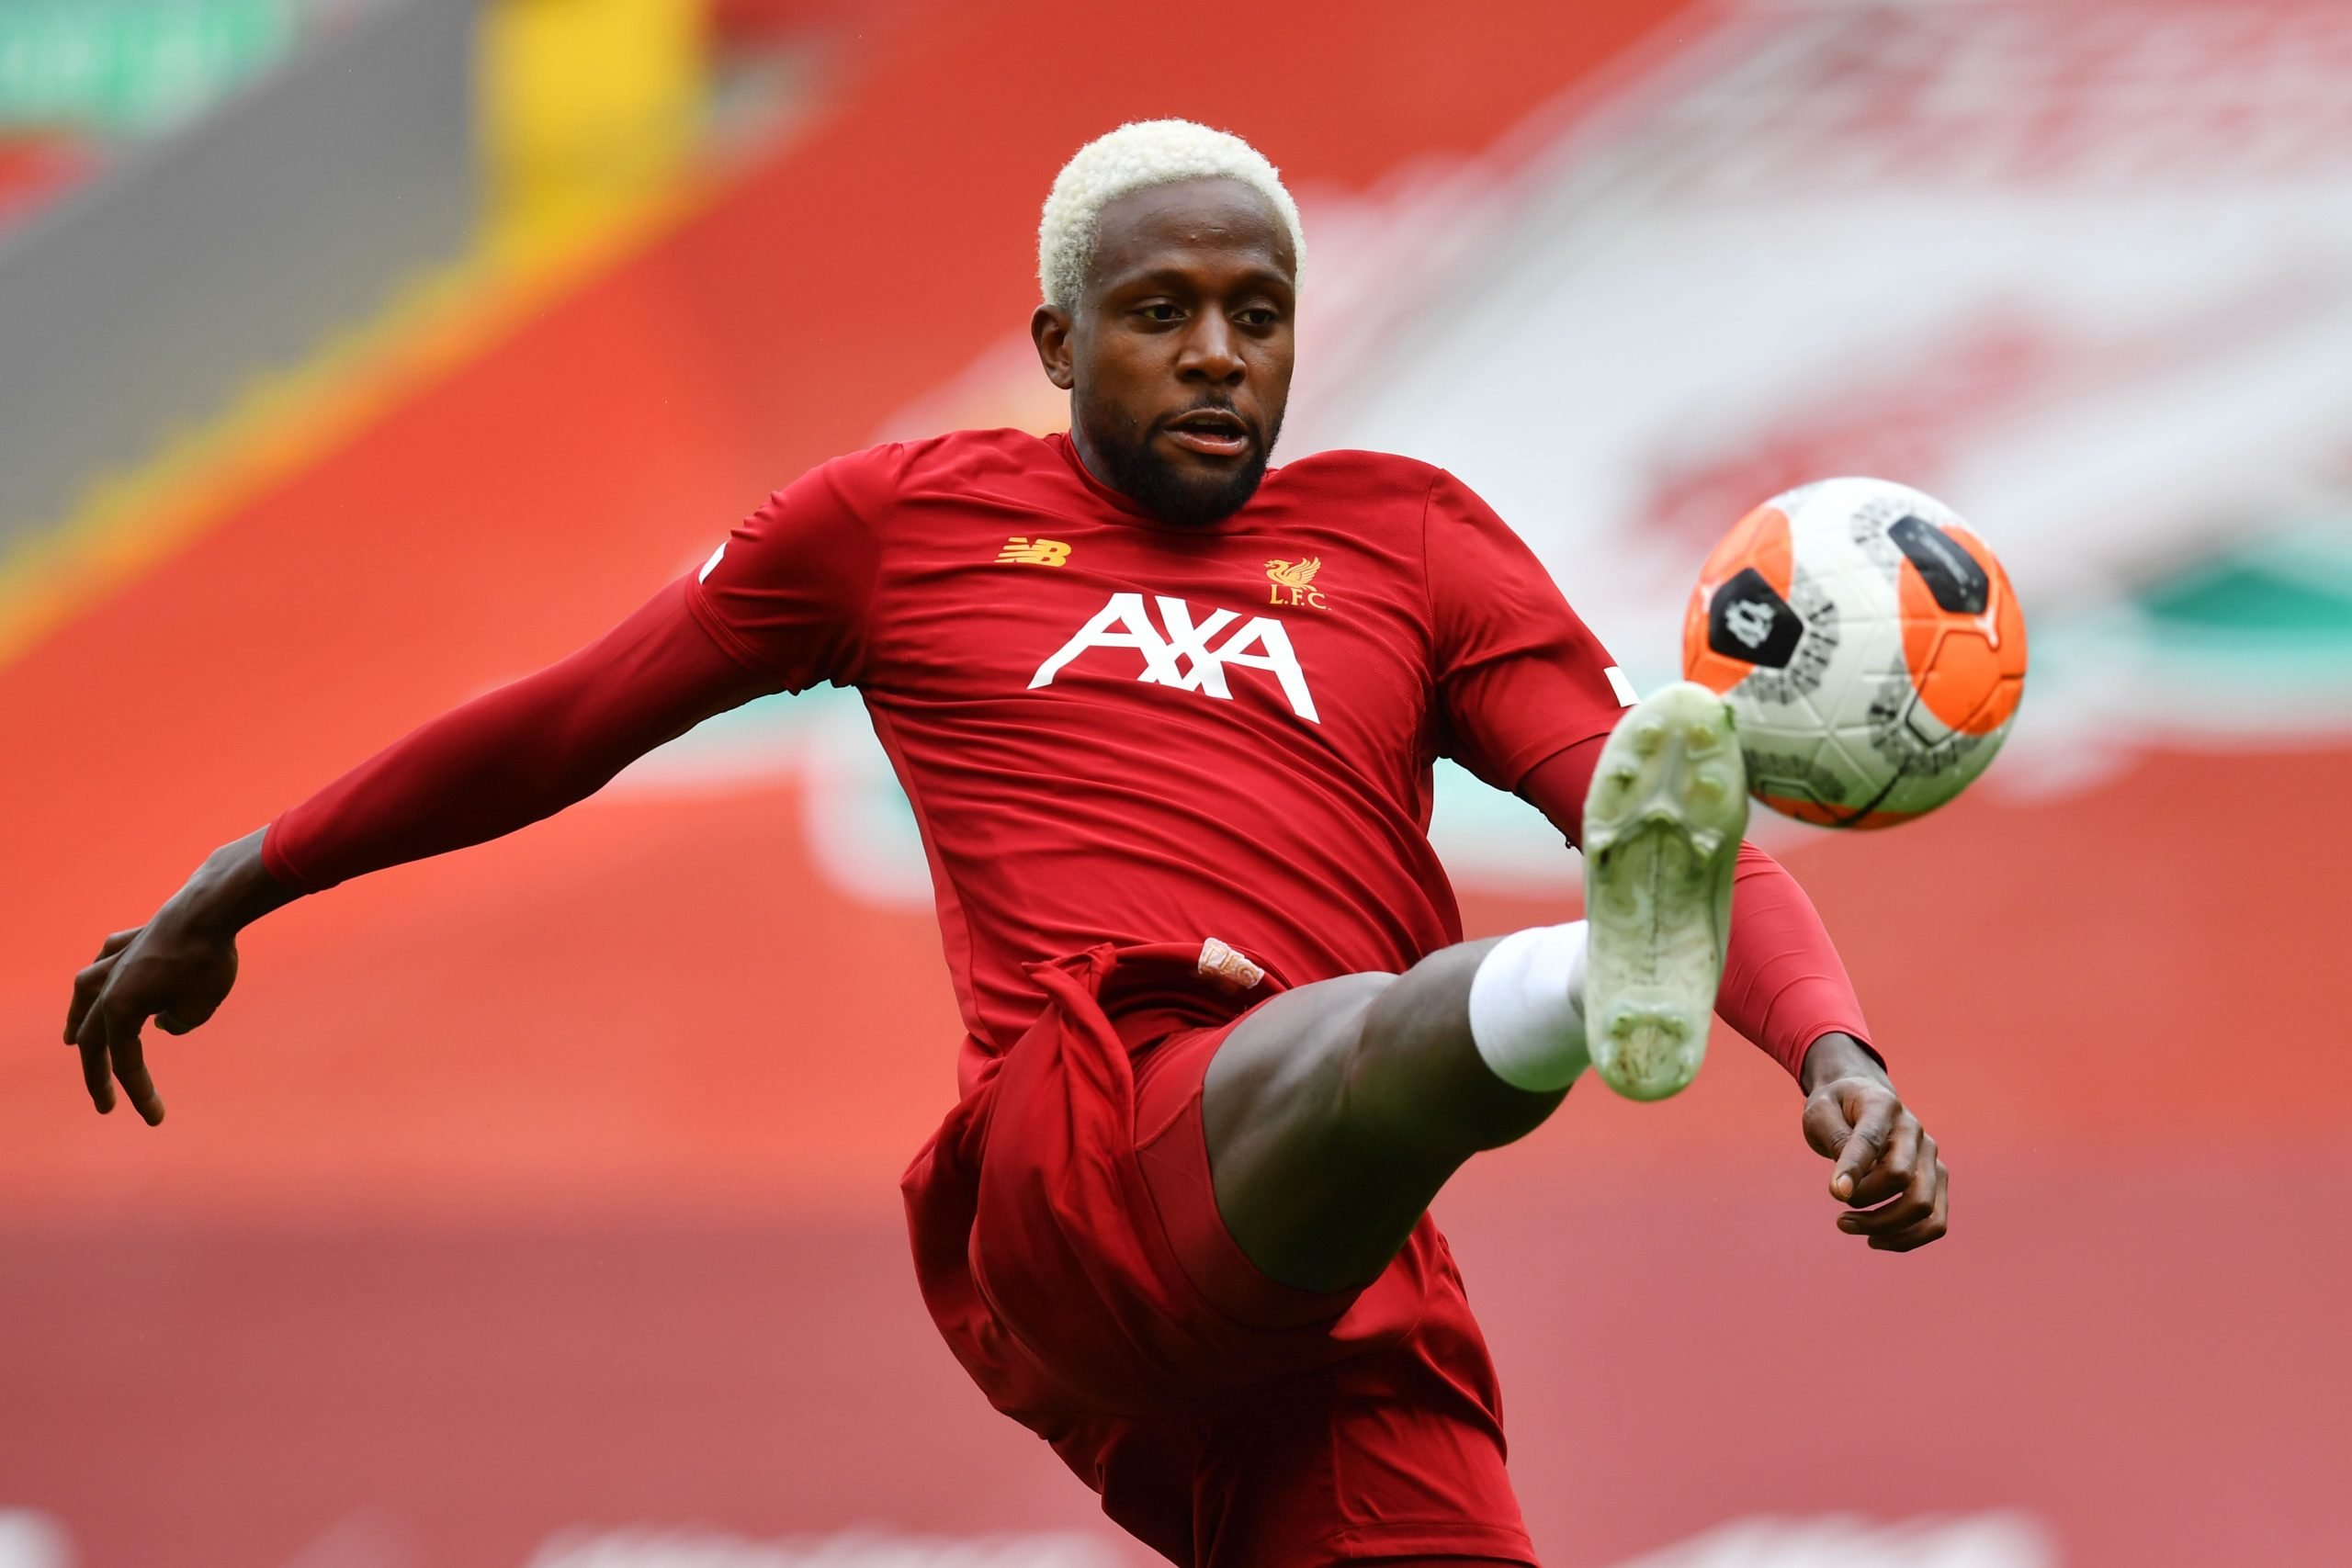 Aston Villa face stiff competition in pursuit of Divock Origi who is in action in the picture